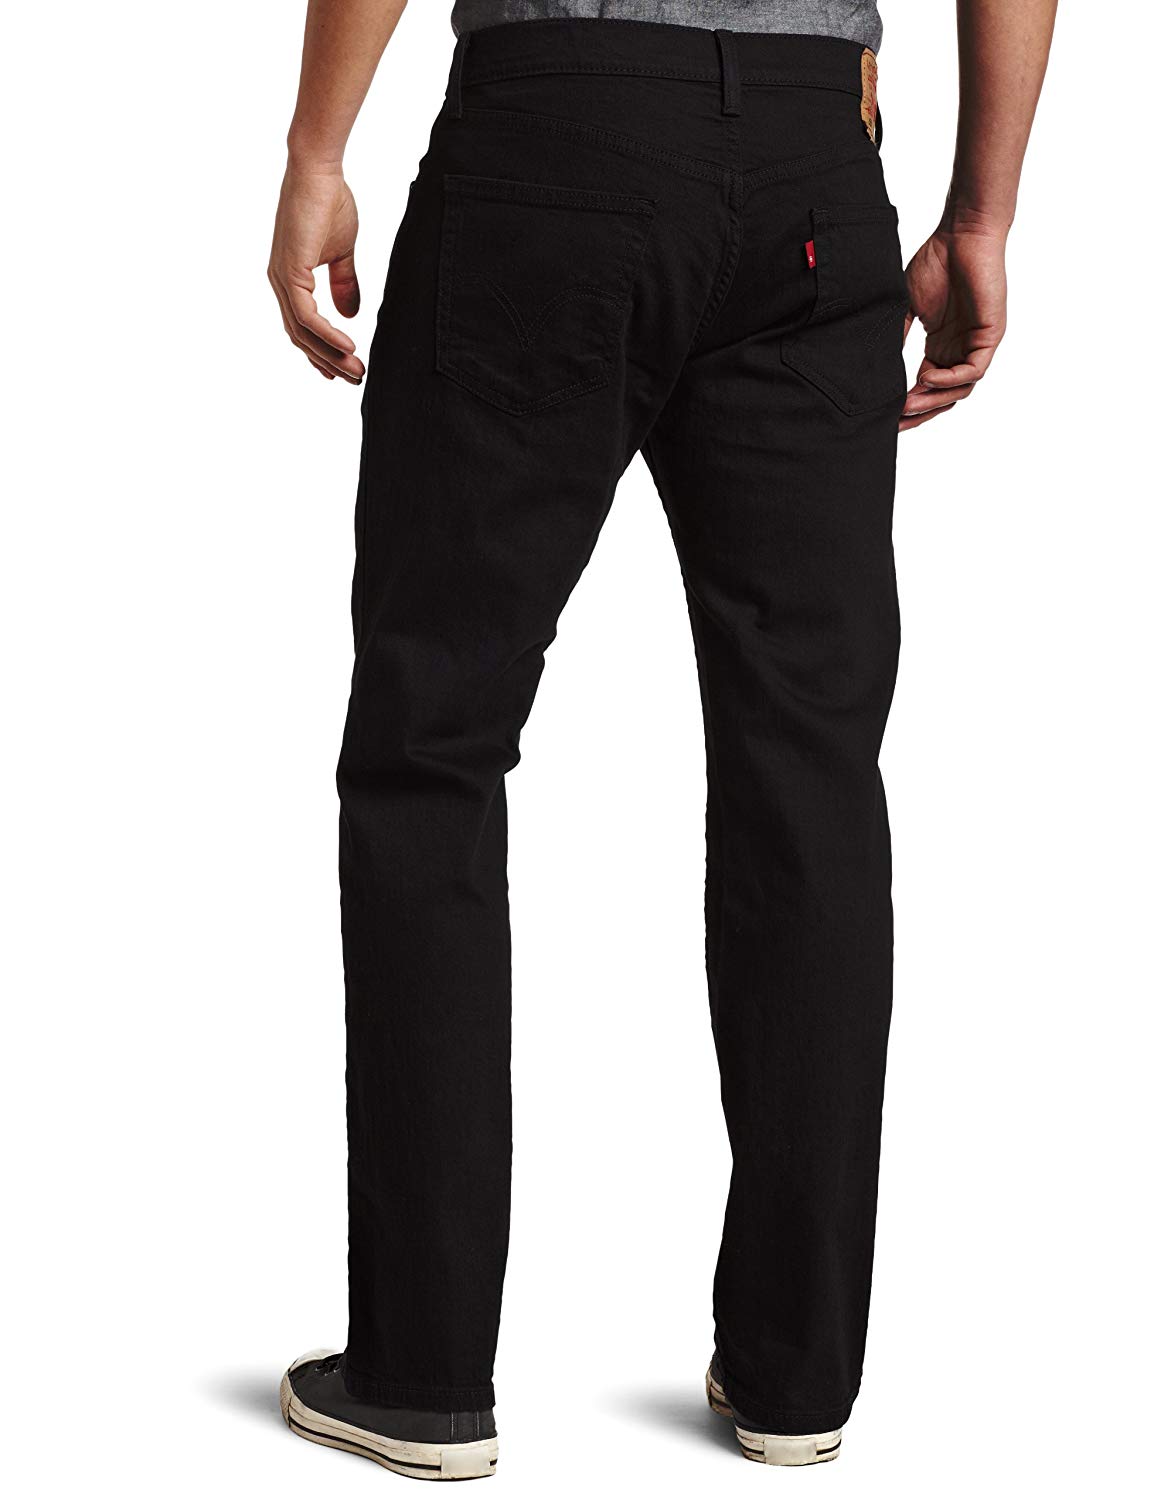 Levi's Men's 559 Relaxed Straight Fit Jean - 40W x 30L -, Black, Size ...